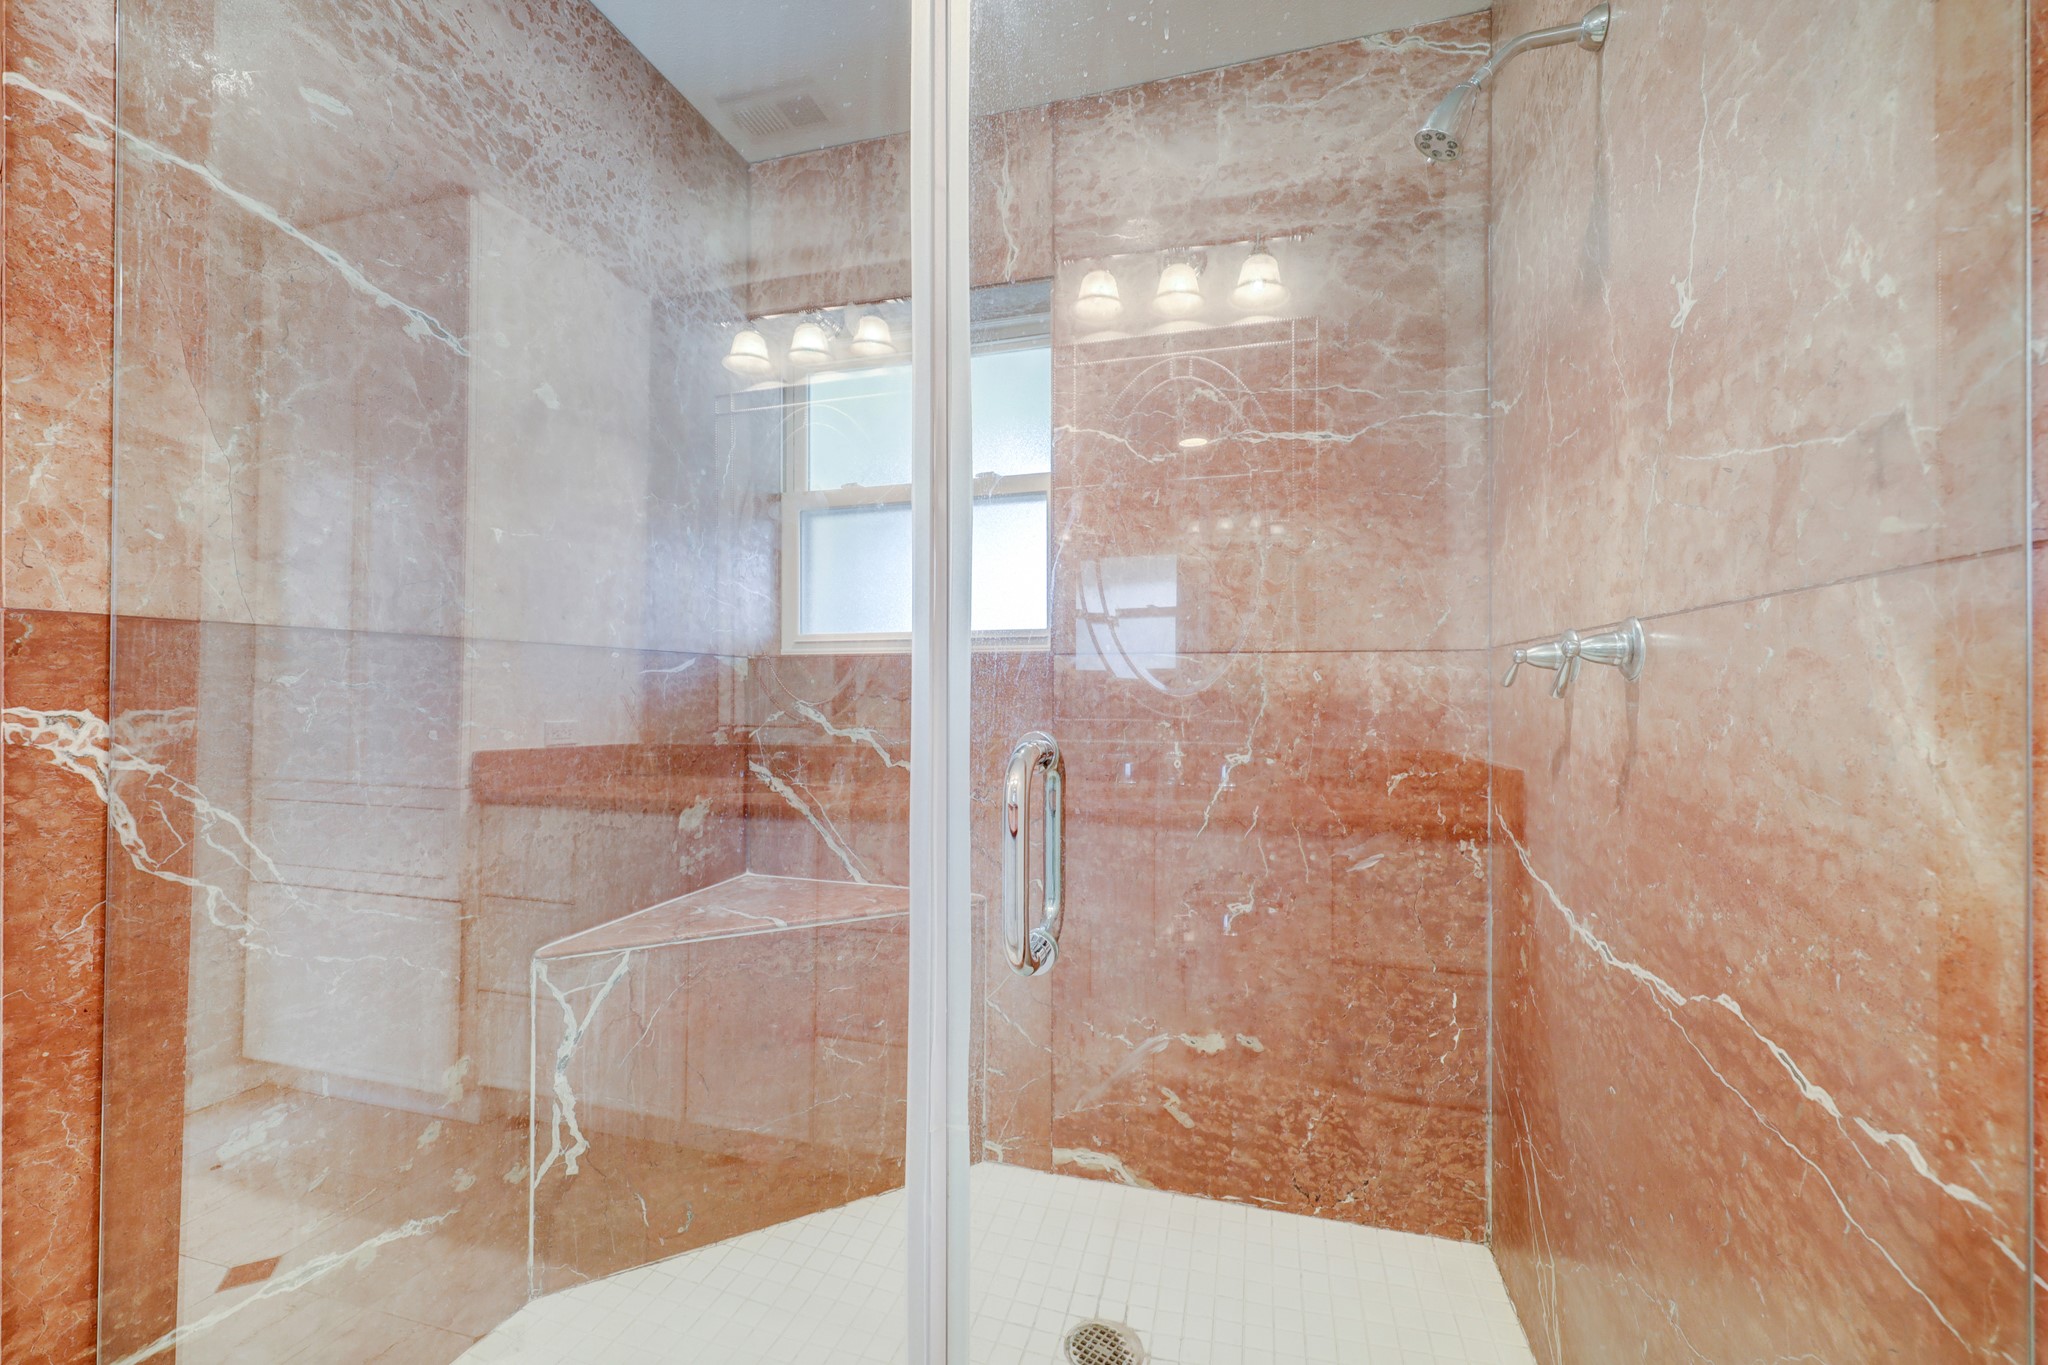 Large marble shower with glass enclosure and bench seat.